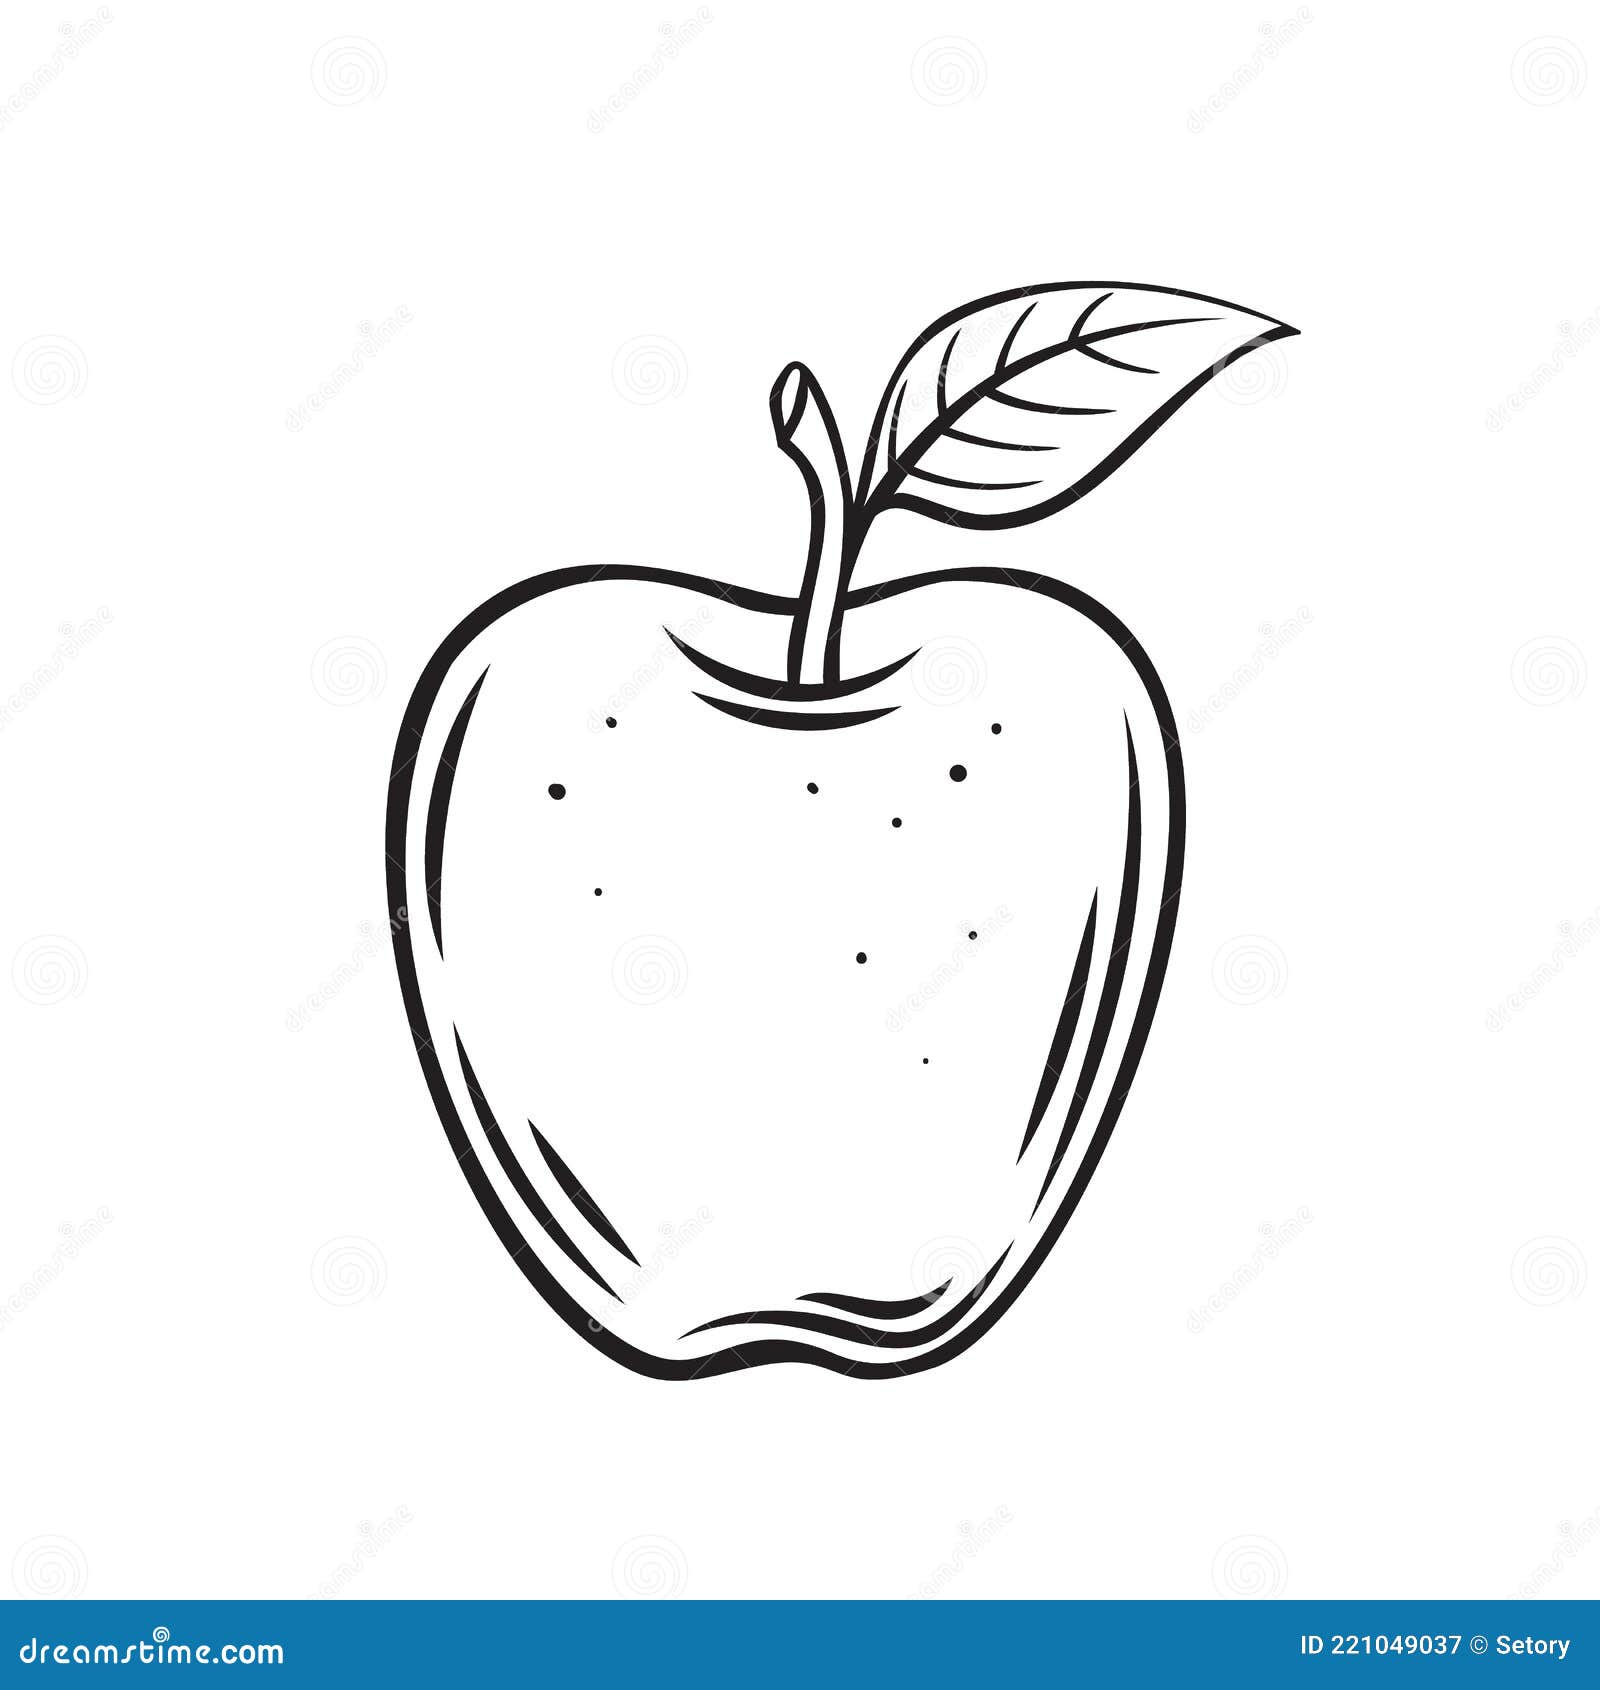 How to Draw an Apple  Skip To My Lou